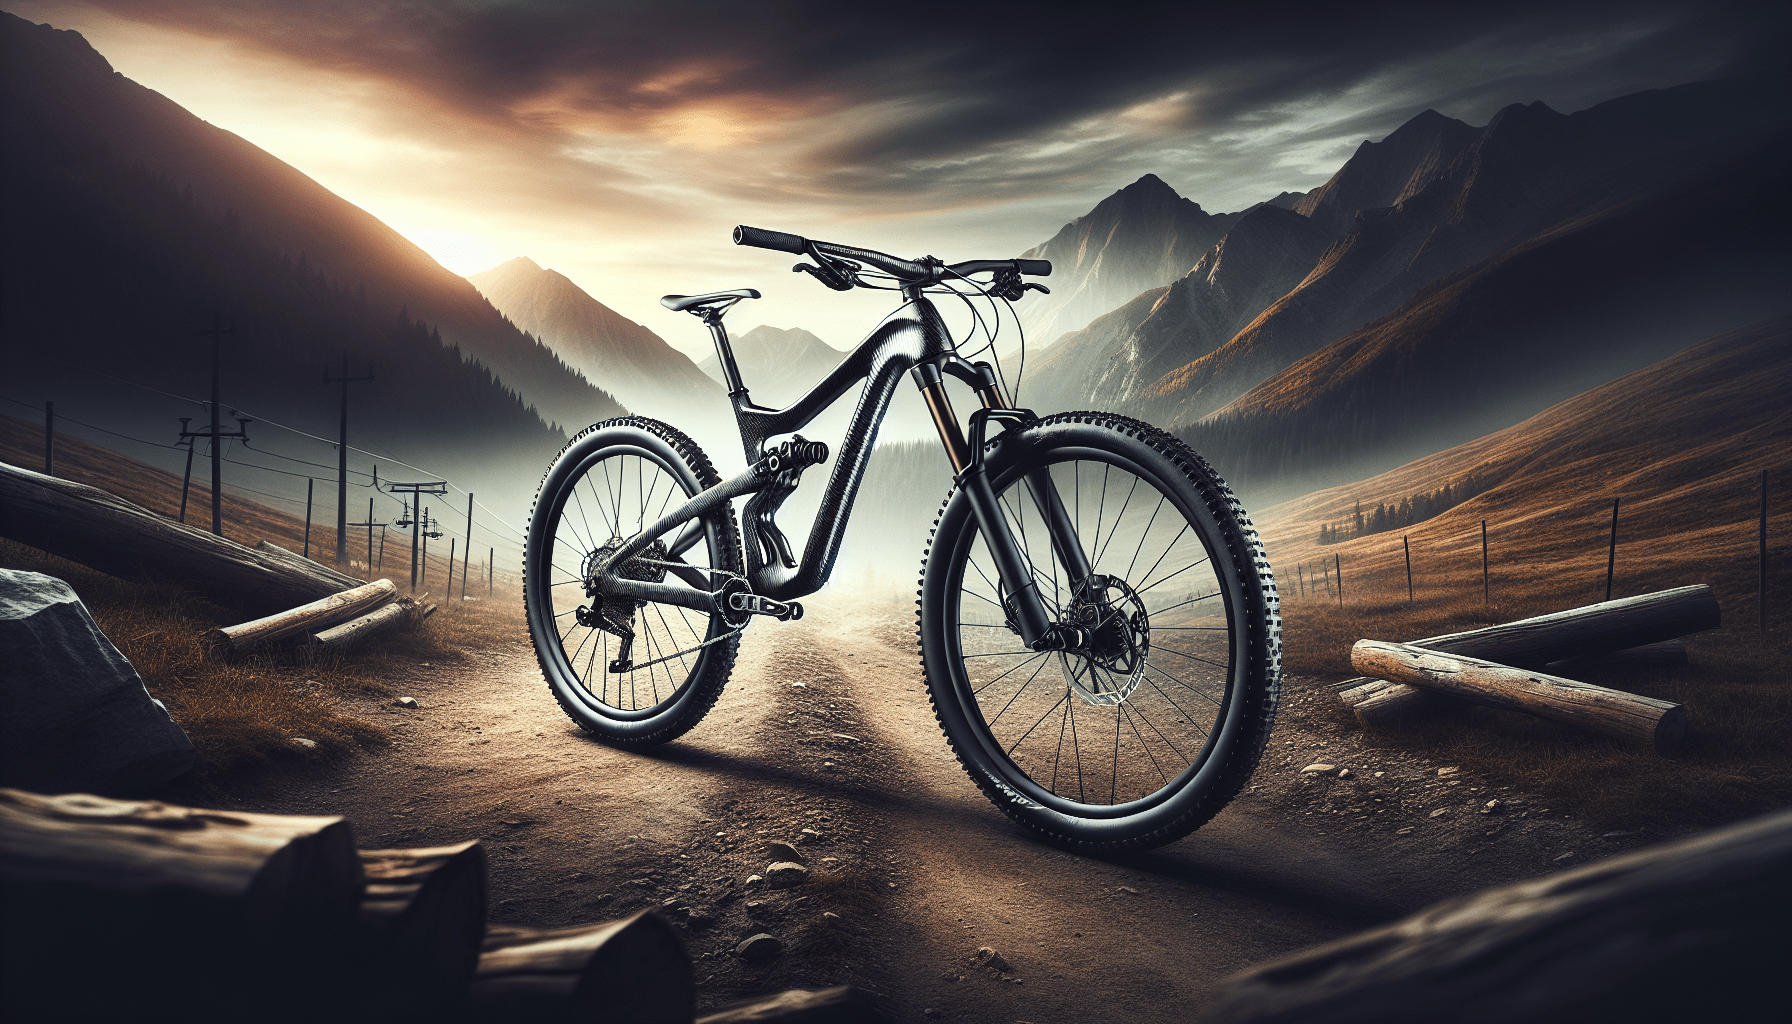 Get Ready To Blaze New Trails: The Top 3 Carbon Off-Road Bikes!